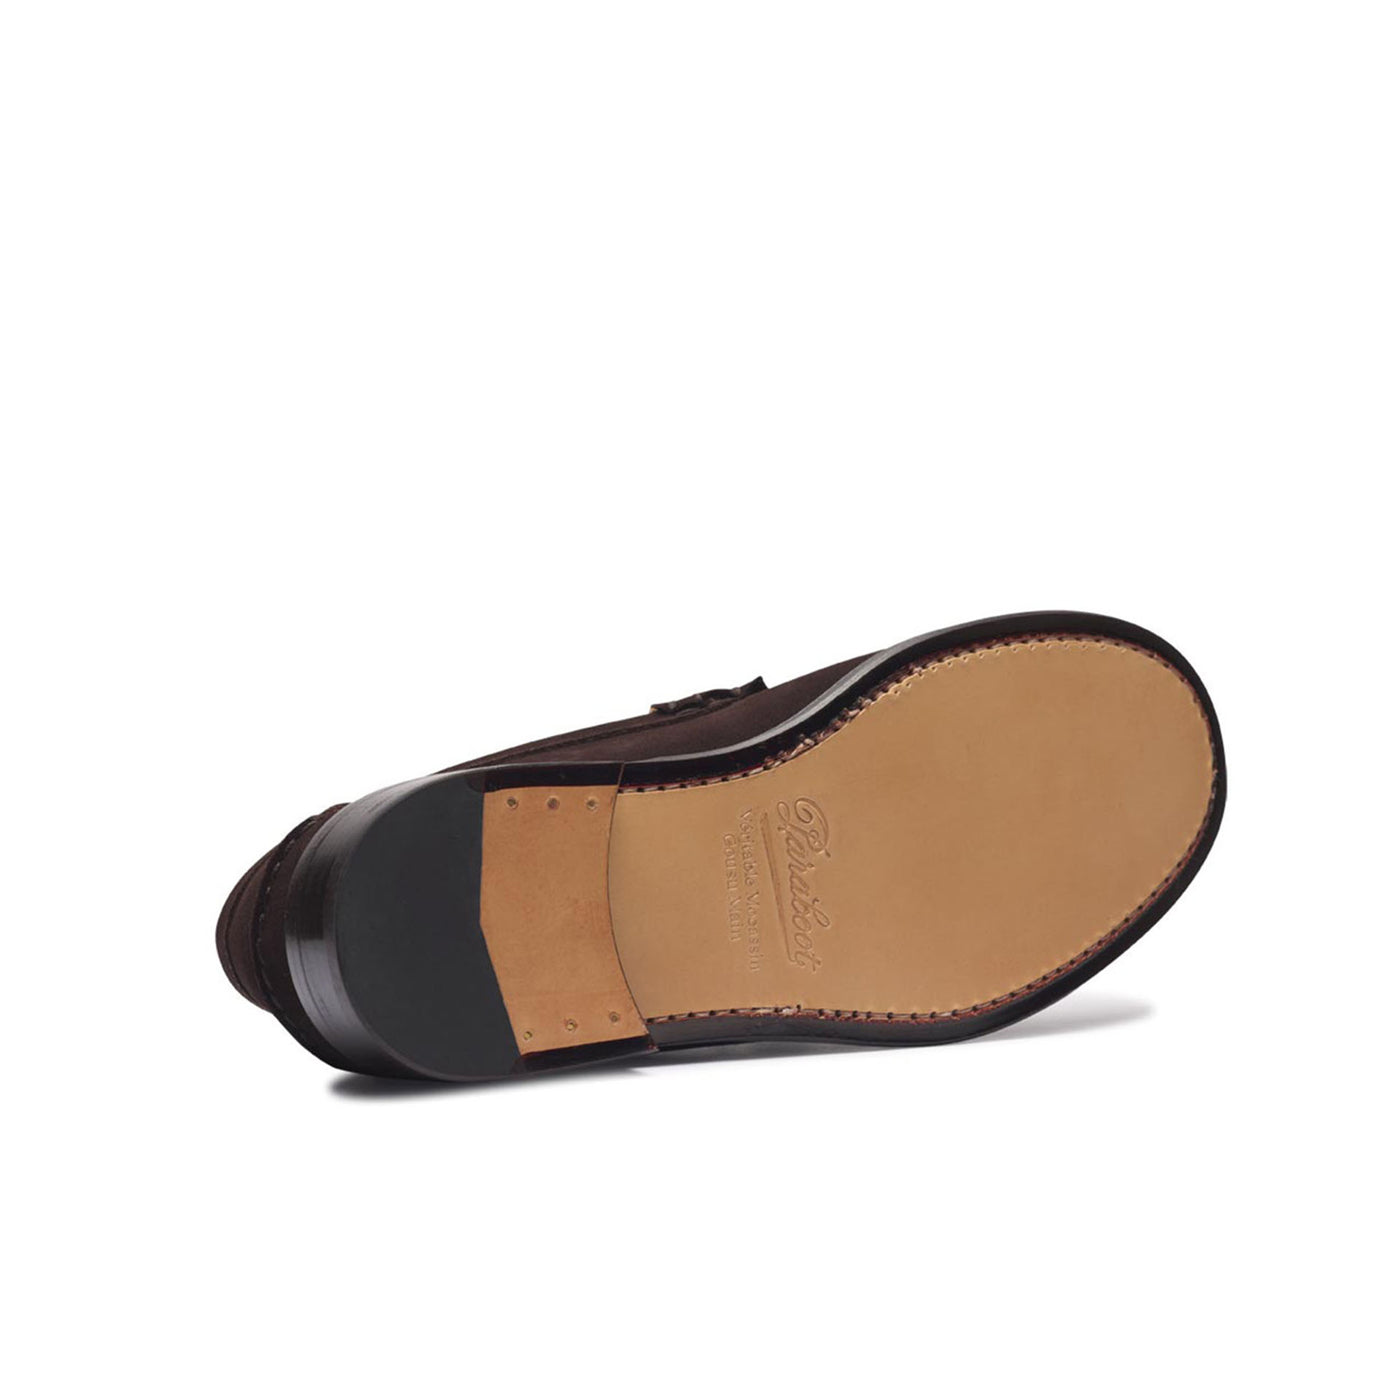 Cornell Loafer - Brown Suede